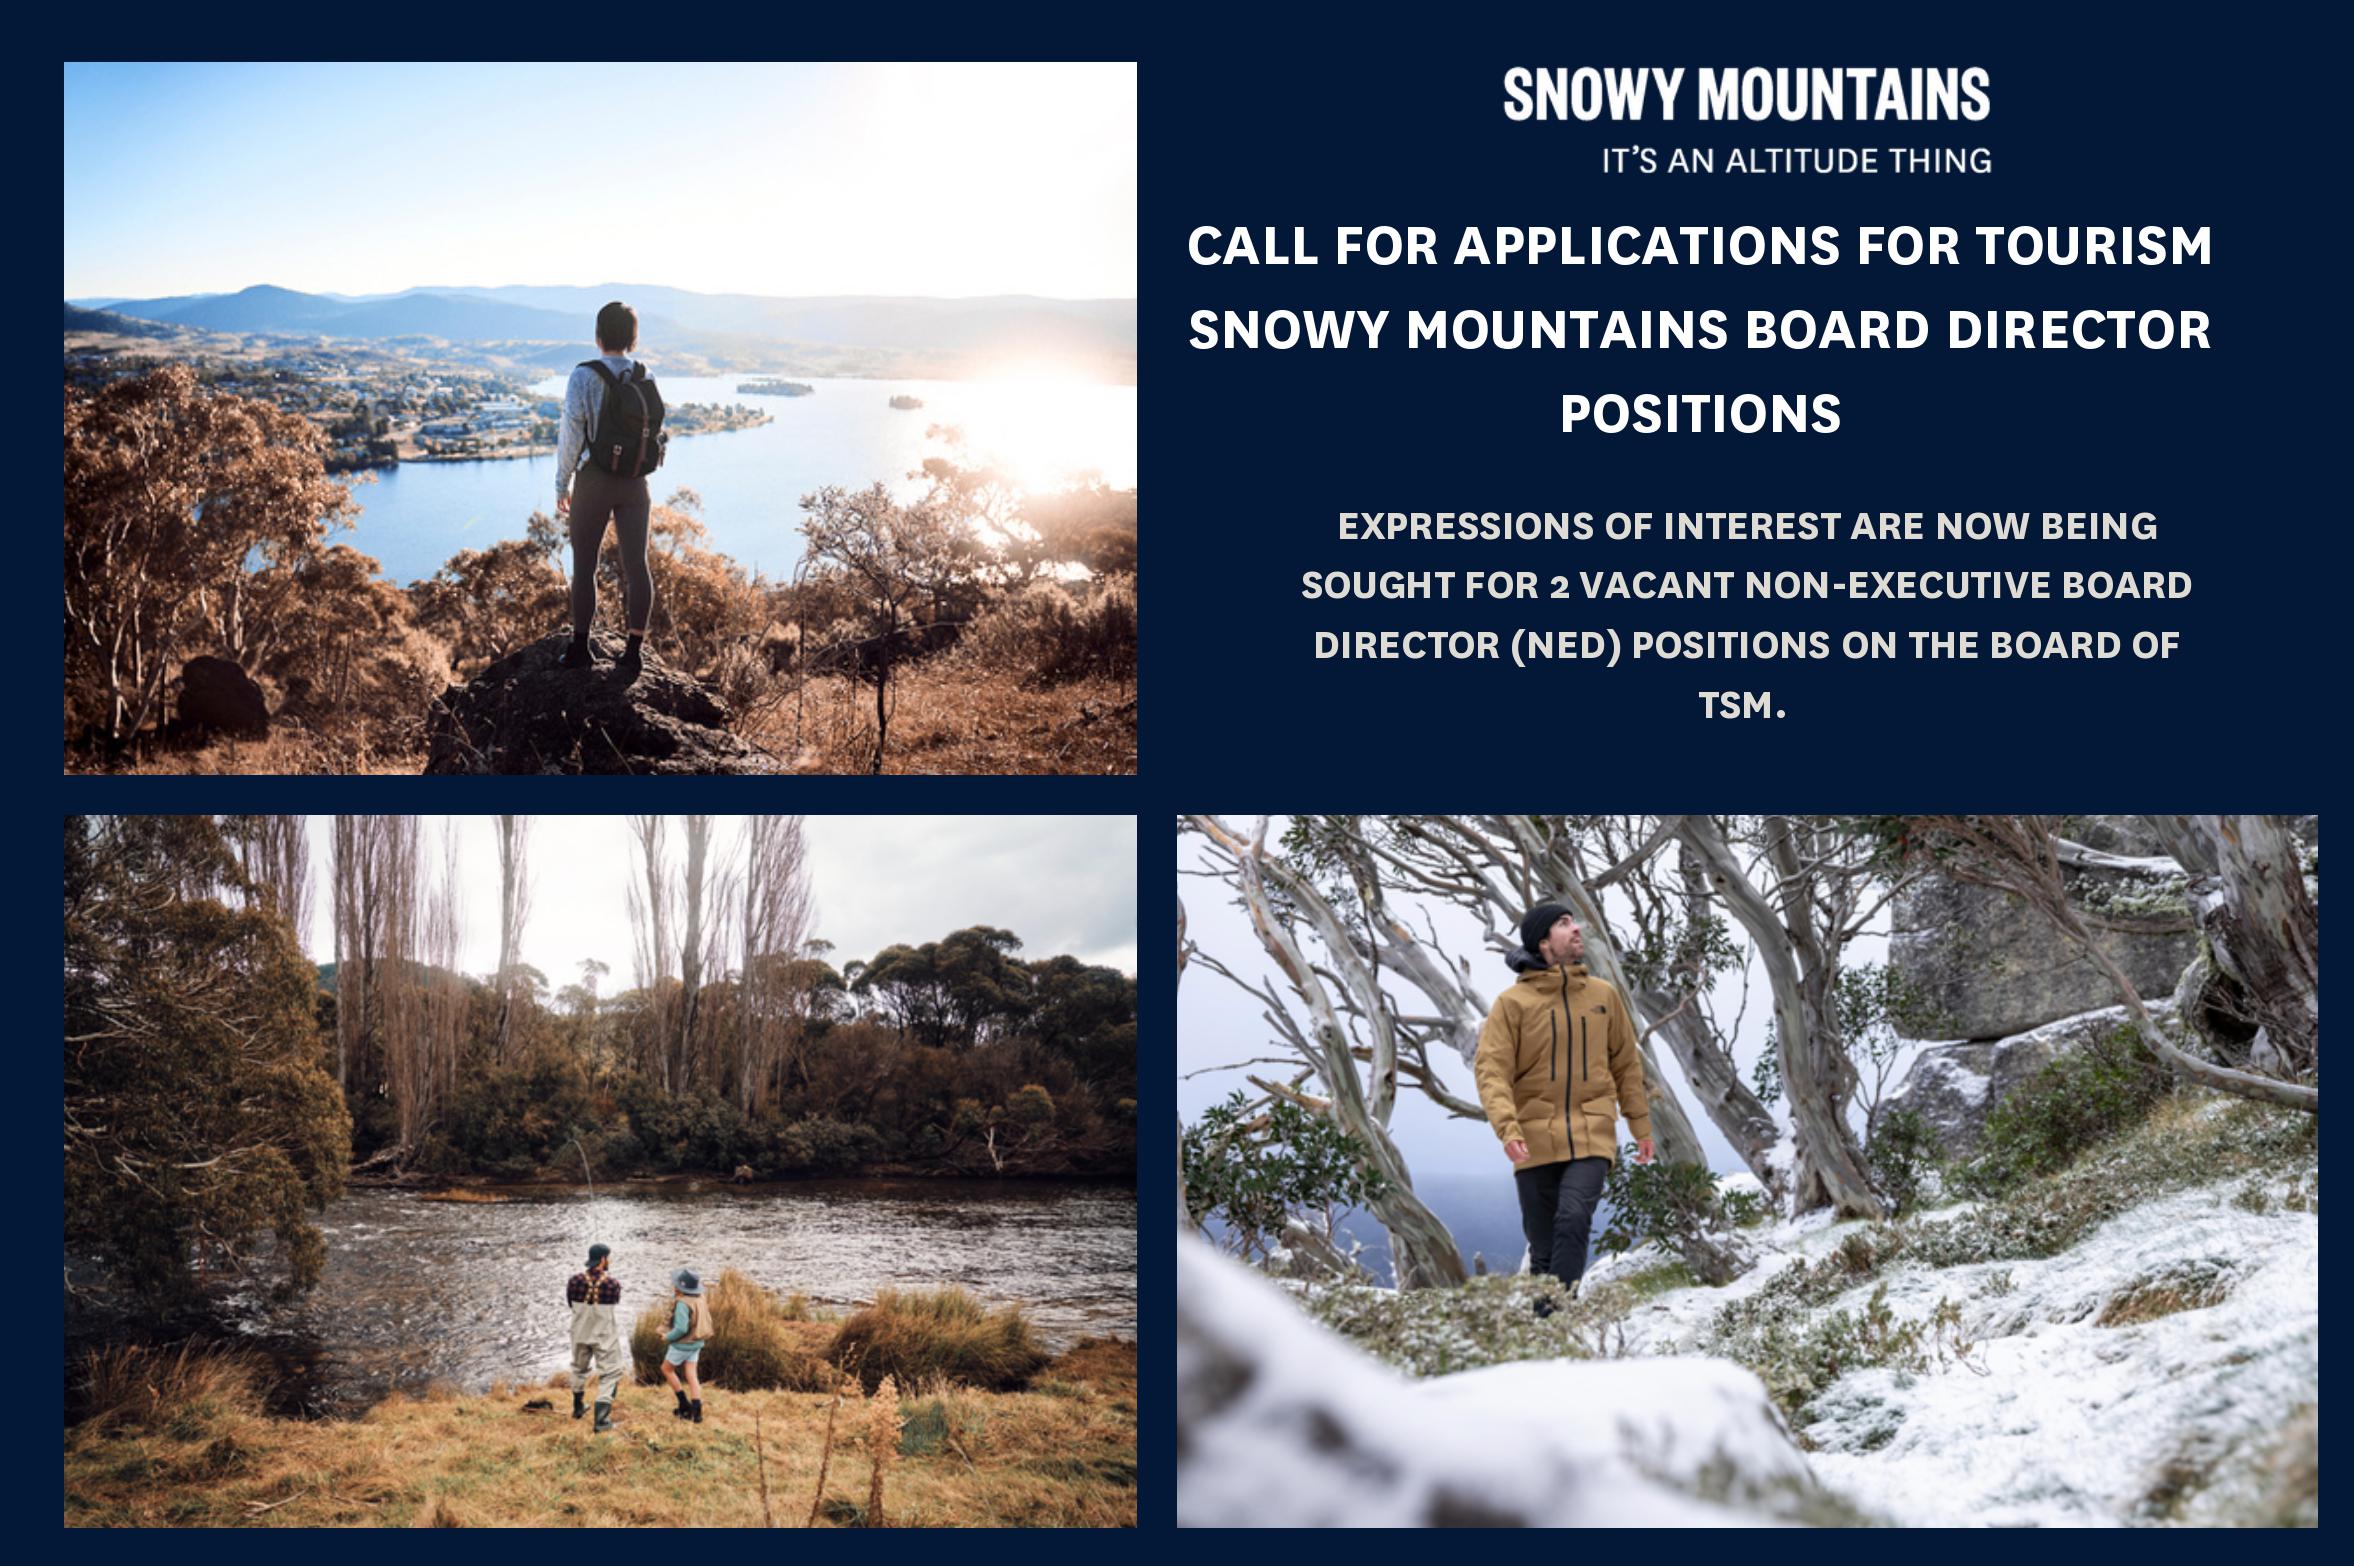 CALL FOR APPLICATIONS FOR TOURISM SNOWY MOUNTAINS BOARD DIRECTOR POSITIONS